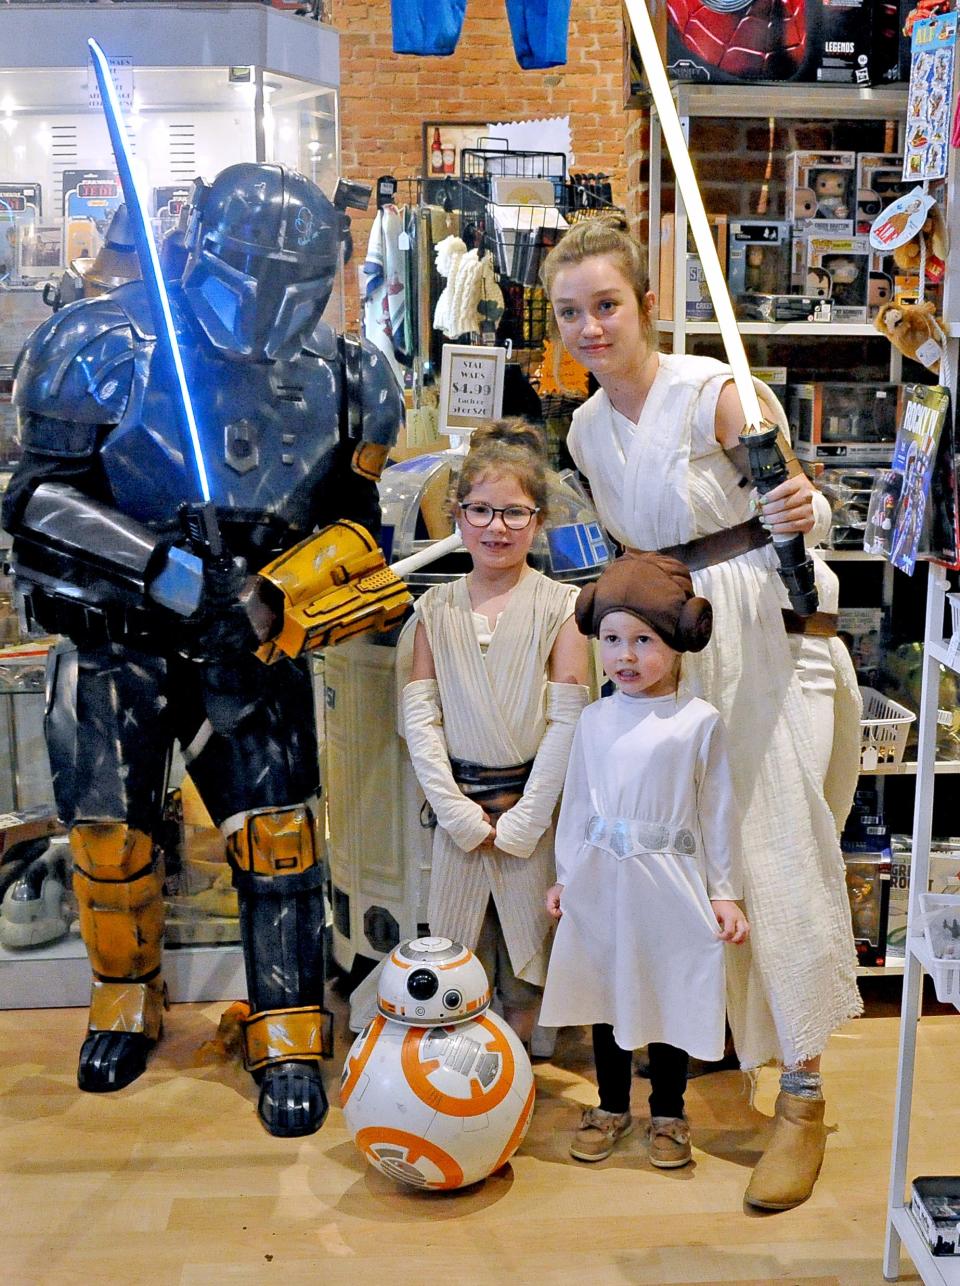 (Left to right) Rob Smith, Quinn and Maeve Gardner and McCartney Sorg pose in their Star Wars costumes at Operation Fandom on May 4. Sorg is from Orrville and cosplays, or dresses, as Star Wars characters on special occasions or for children's birthday parties.